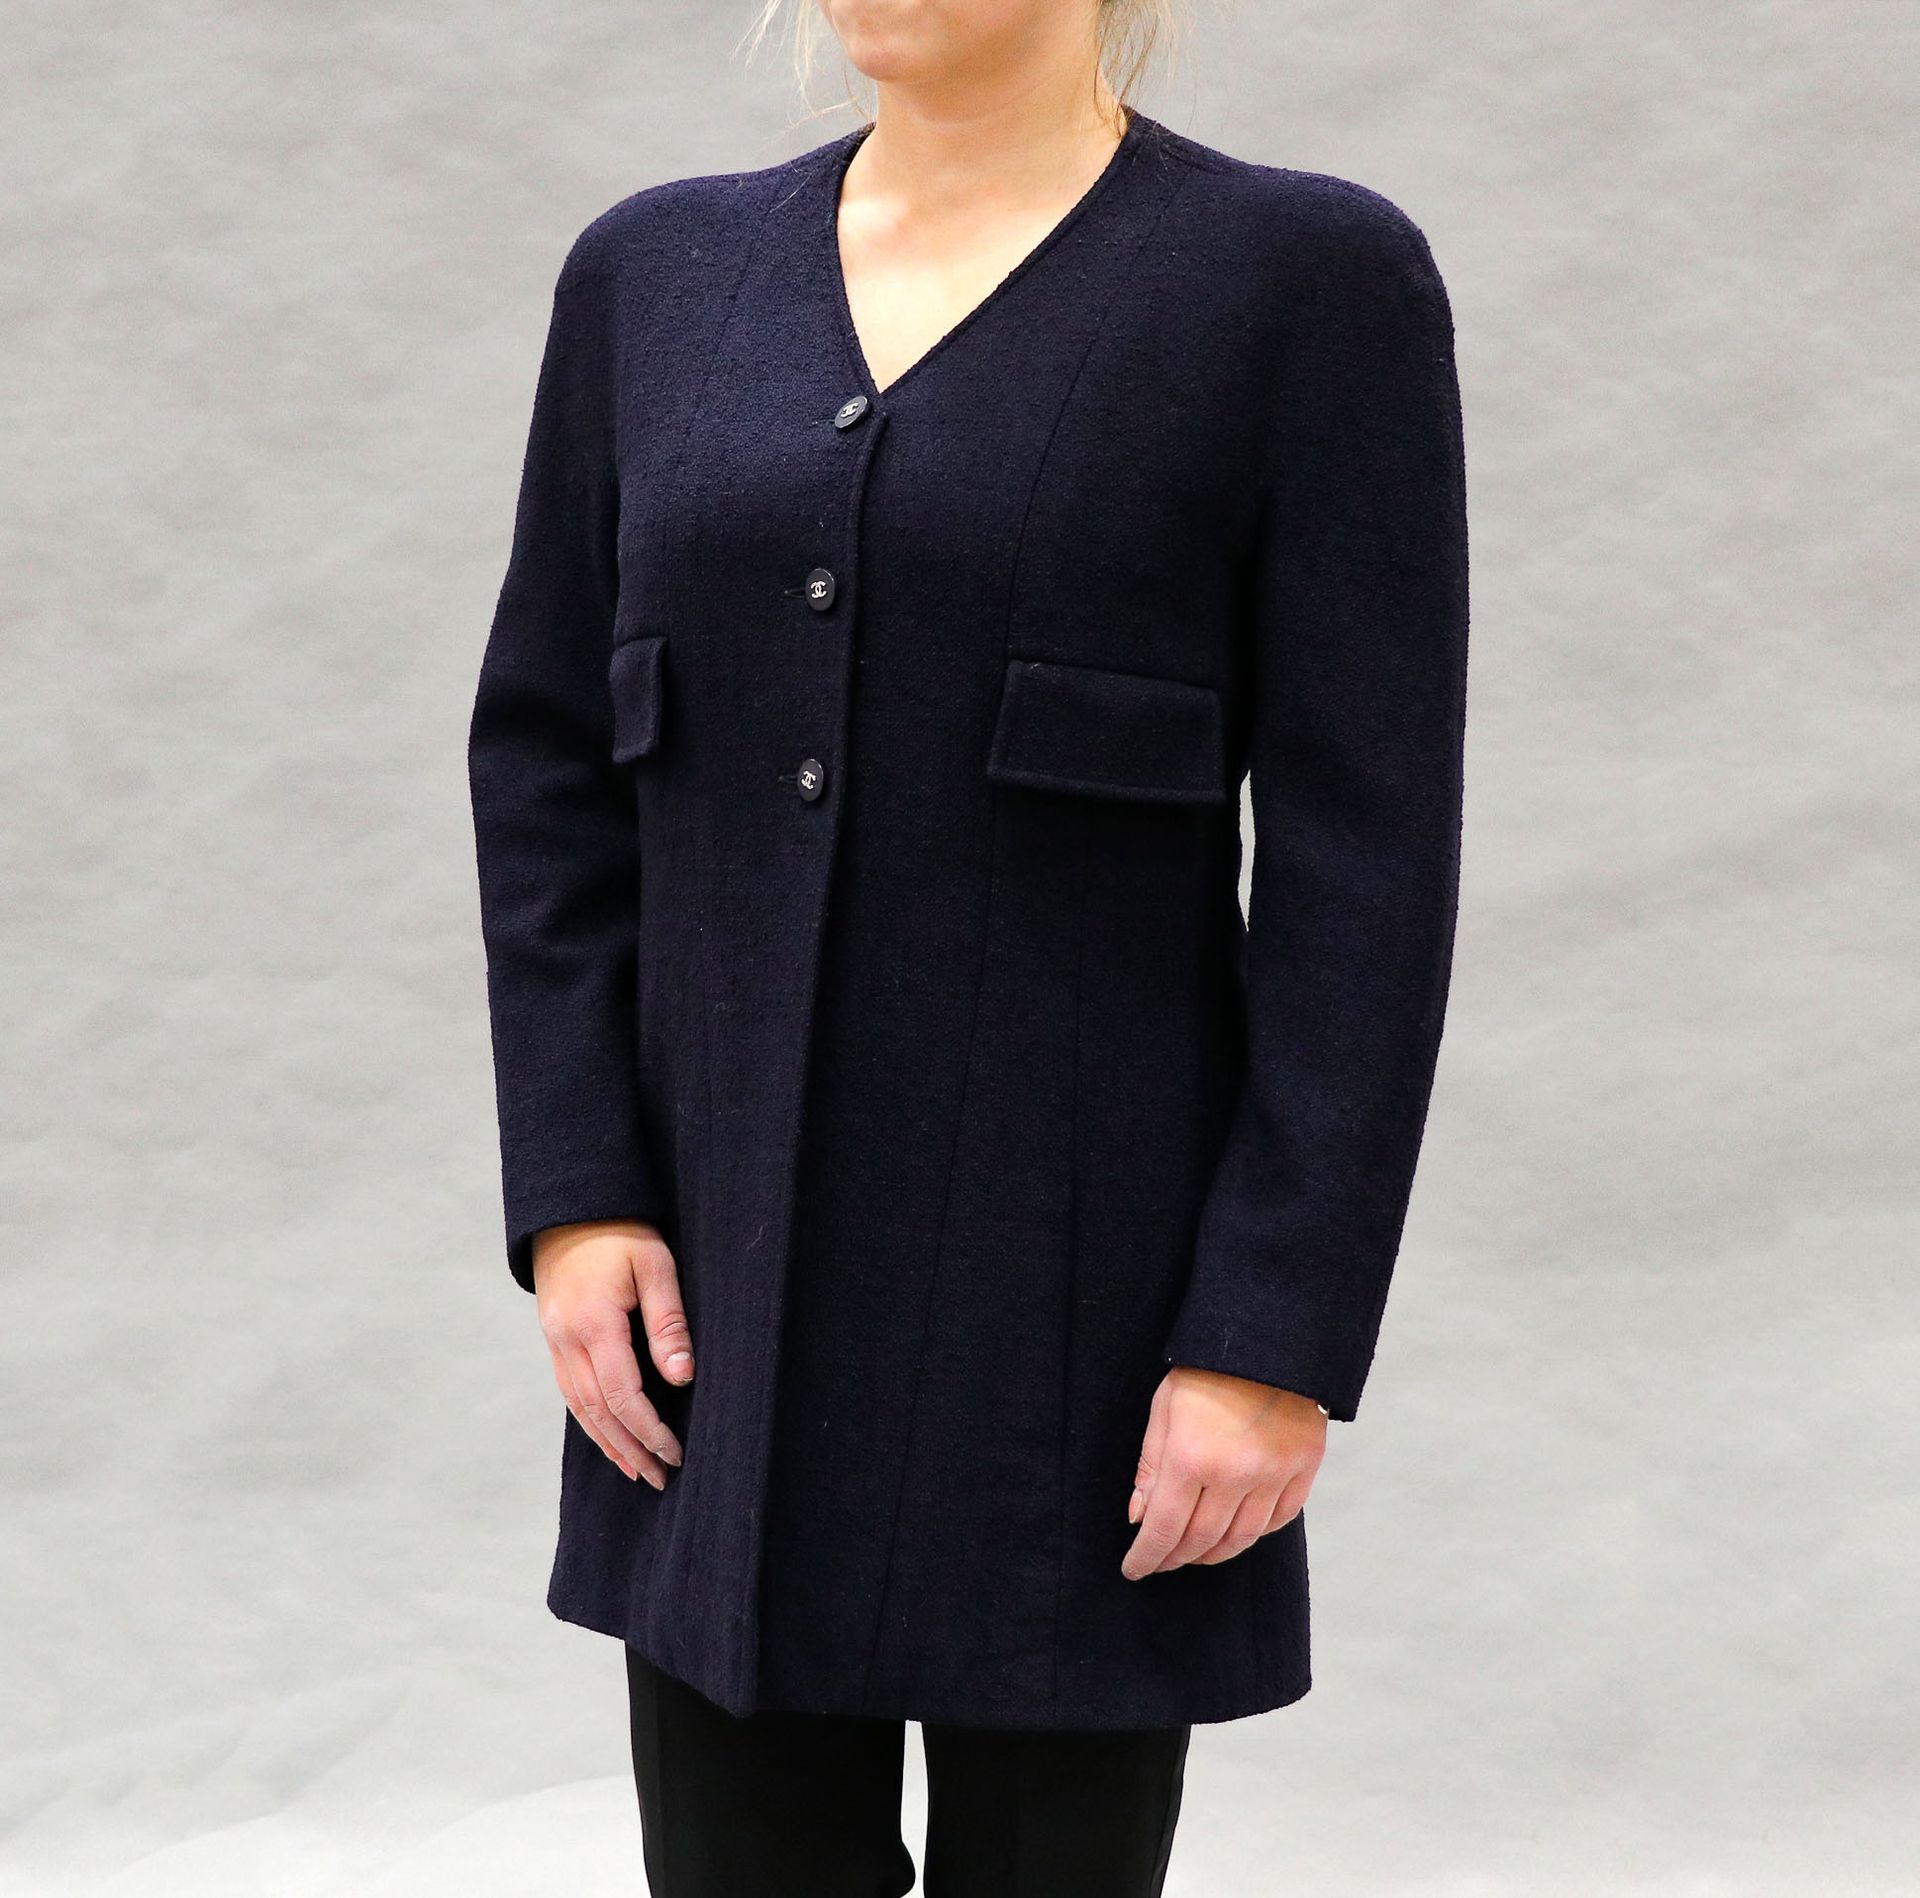 Null CHANEL - Navy wool long jacket - S 42 - Lot sold by authority of justice. L&hellip;